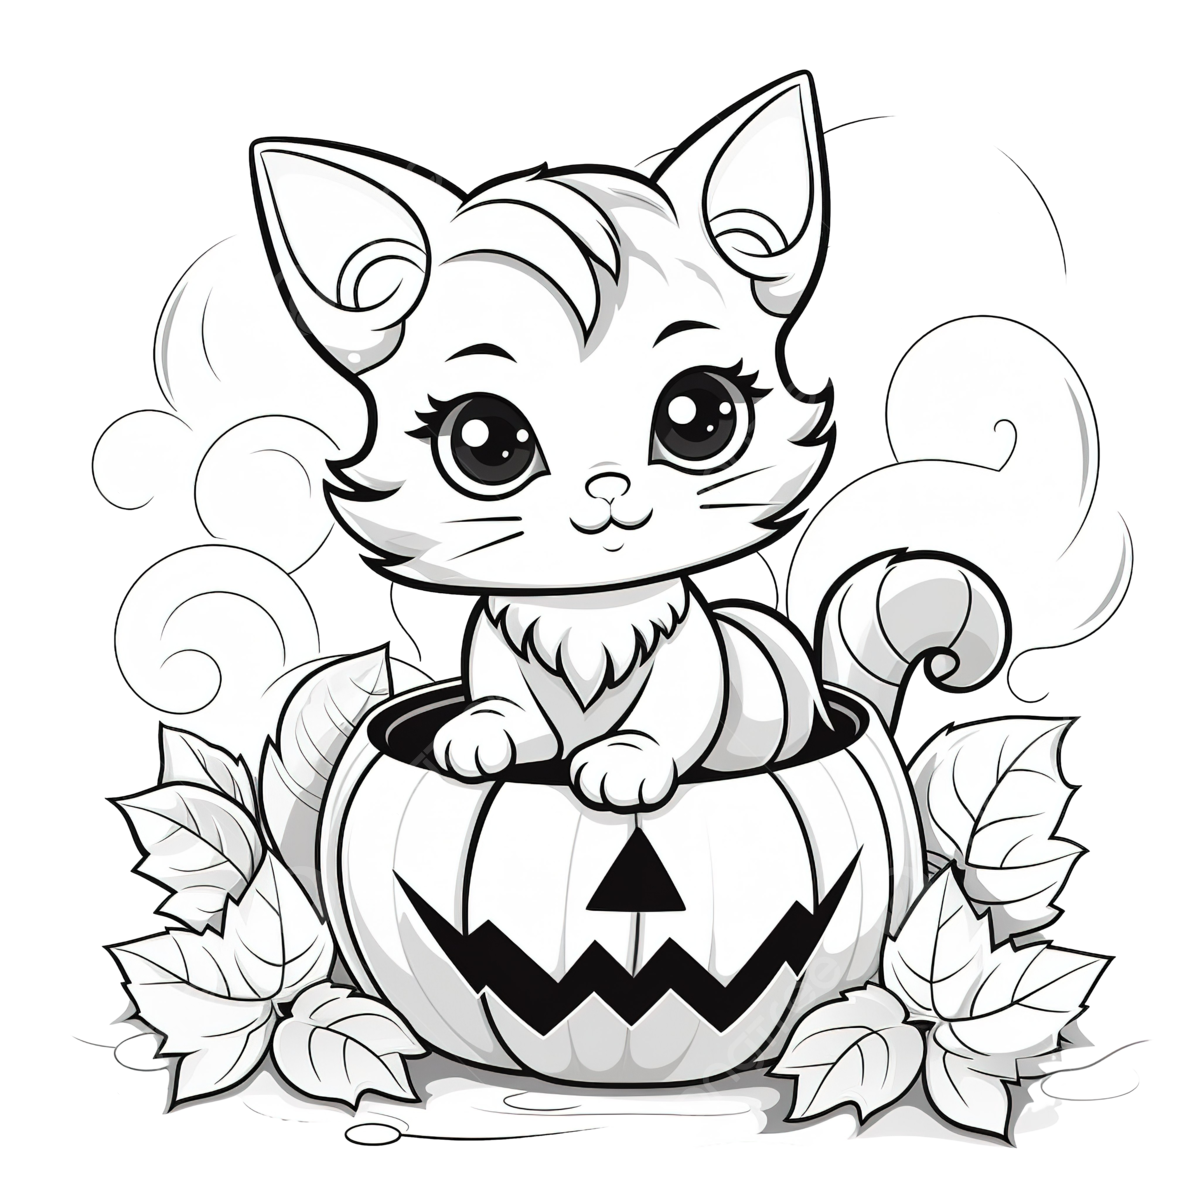 Halloween coloring page with cute black cat in pumpkin cat drawing pumpkin drawing halloween drawing png transparent image and clipart for free download